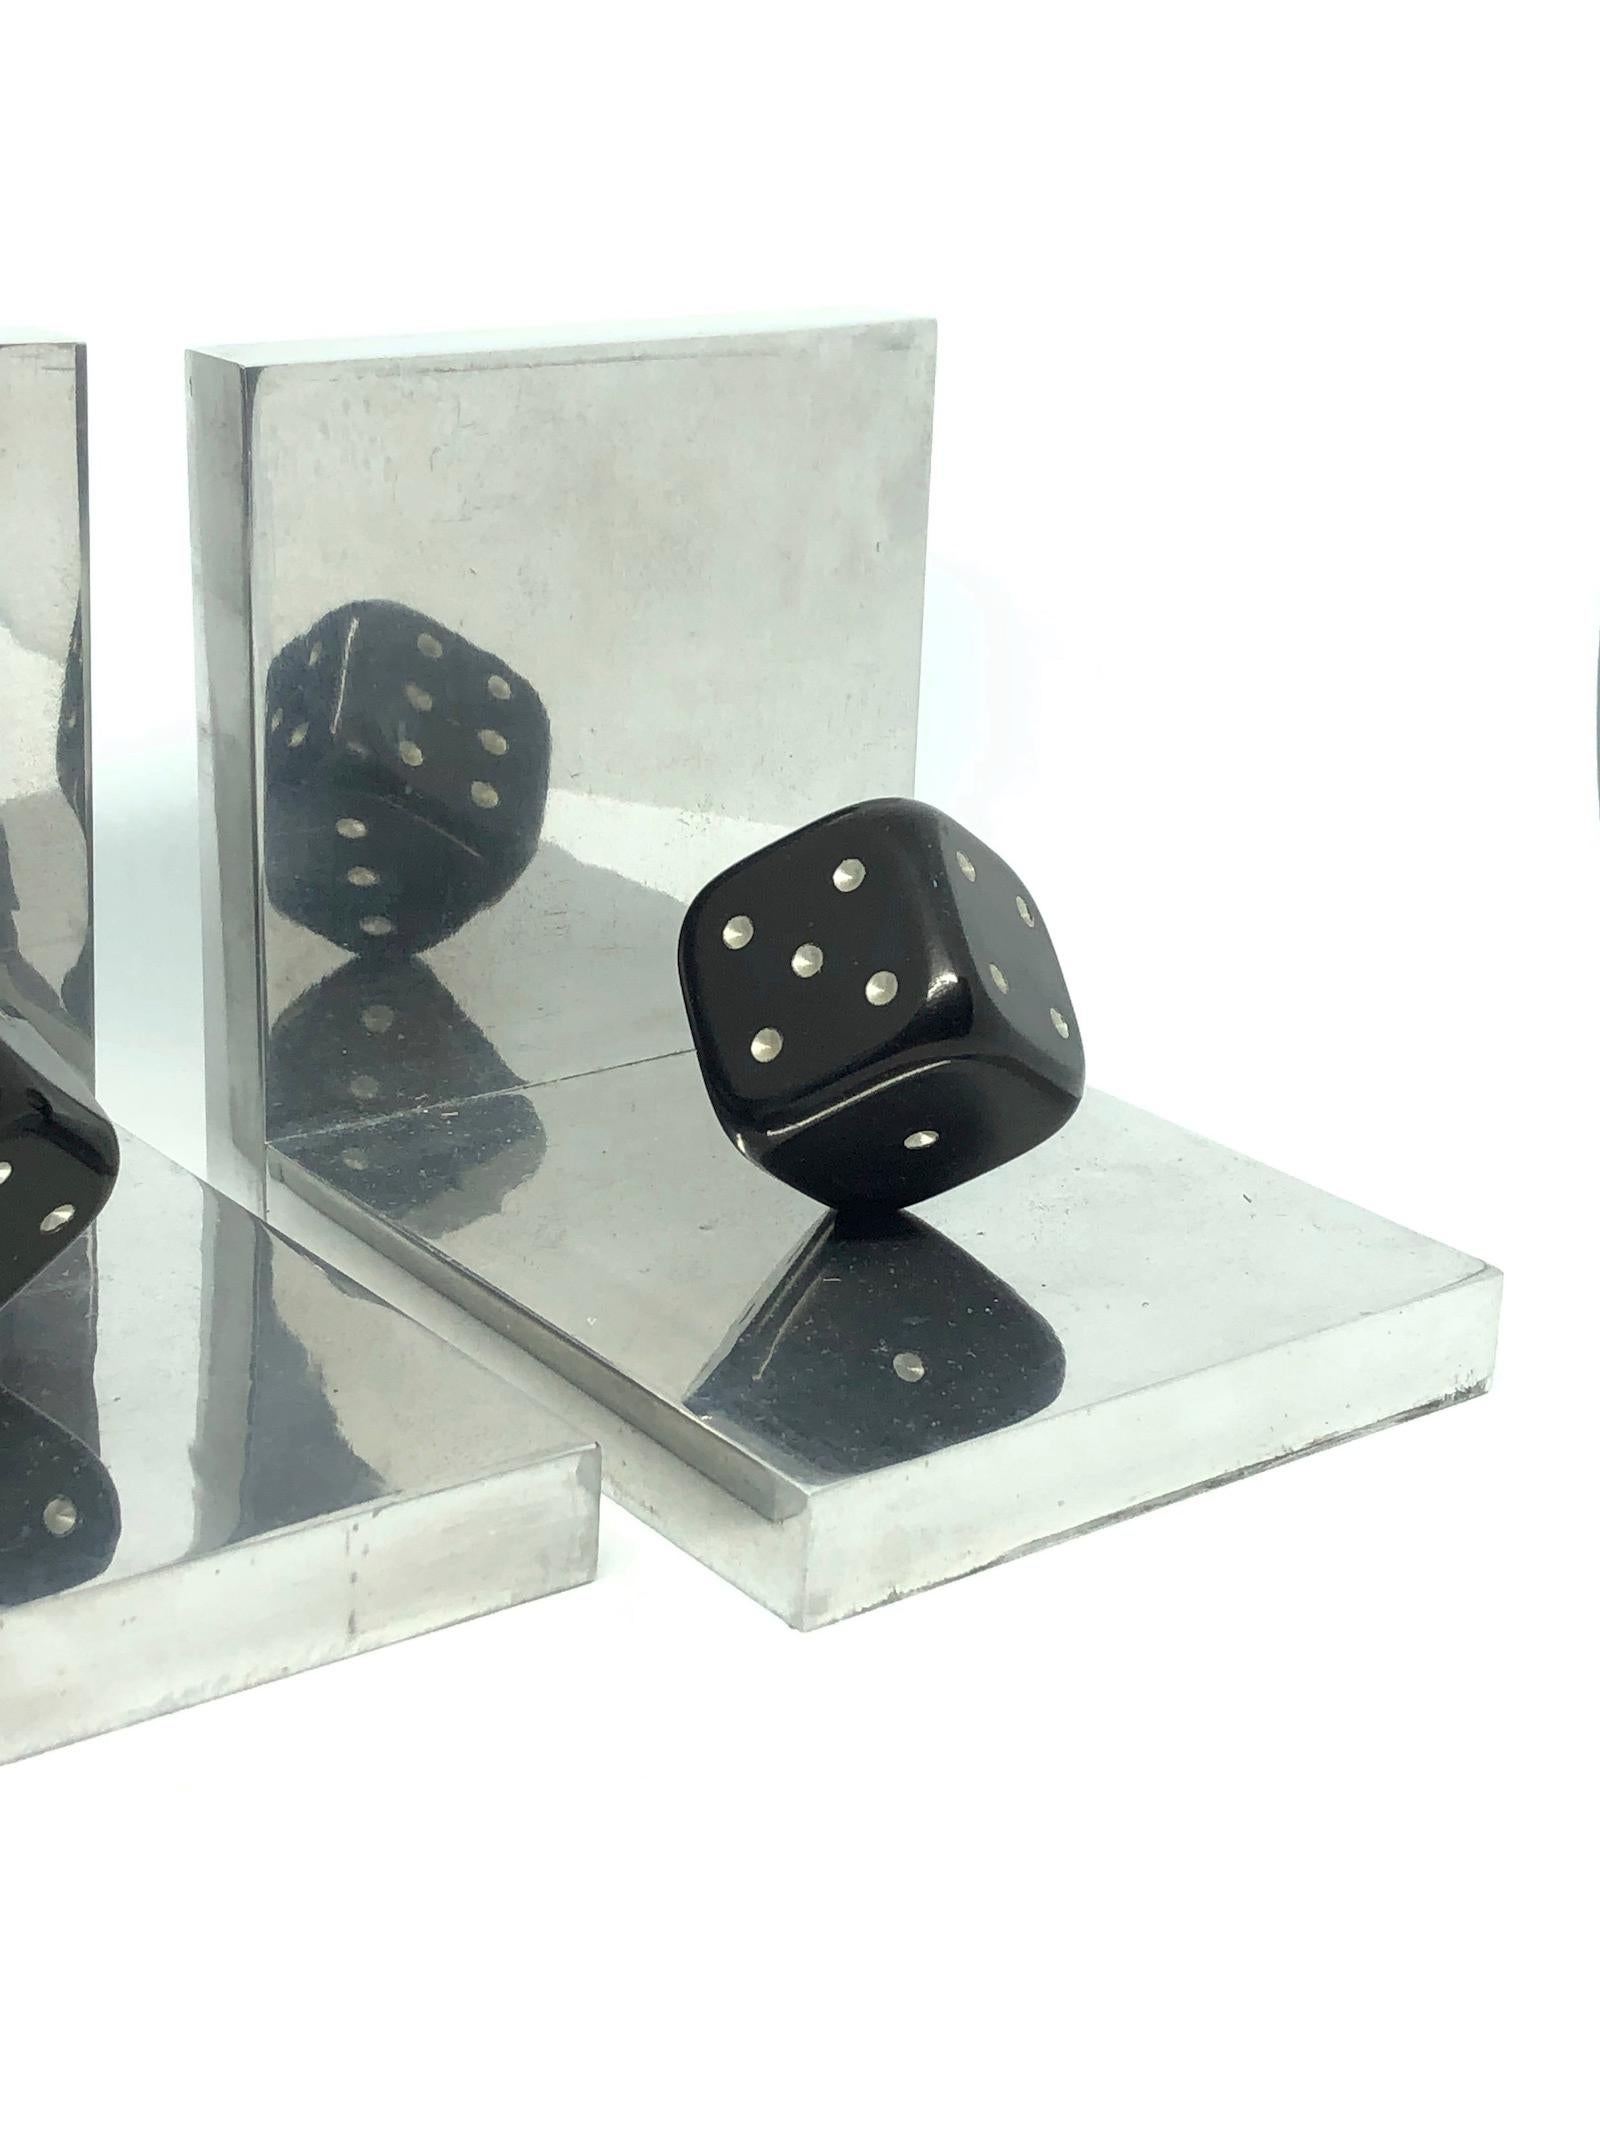 Mid-Century Modern Pair of Art Deco Dice Bookends Black and Chrome Vintage German